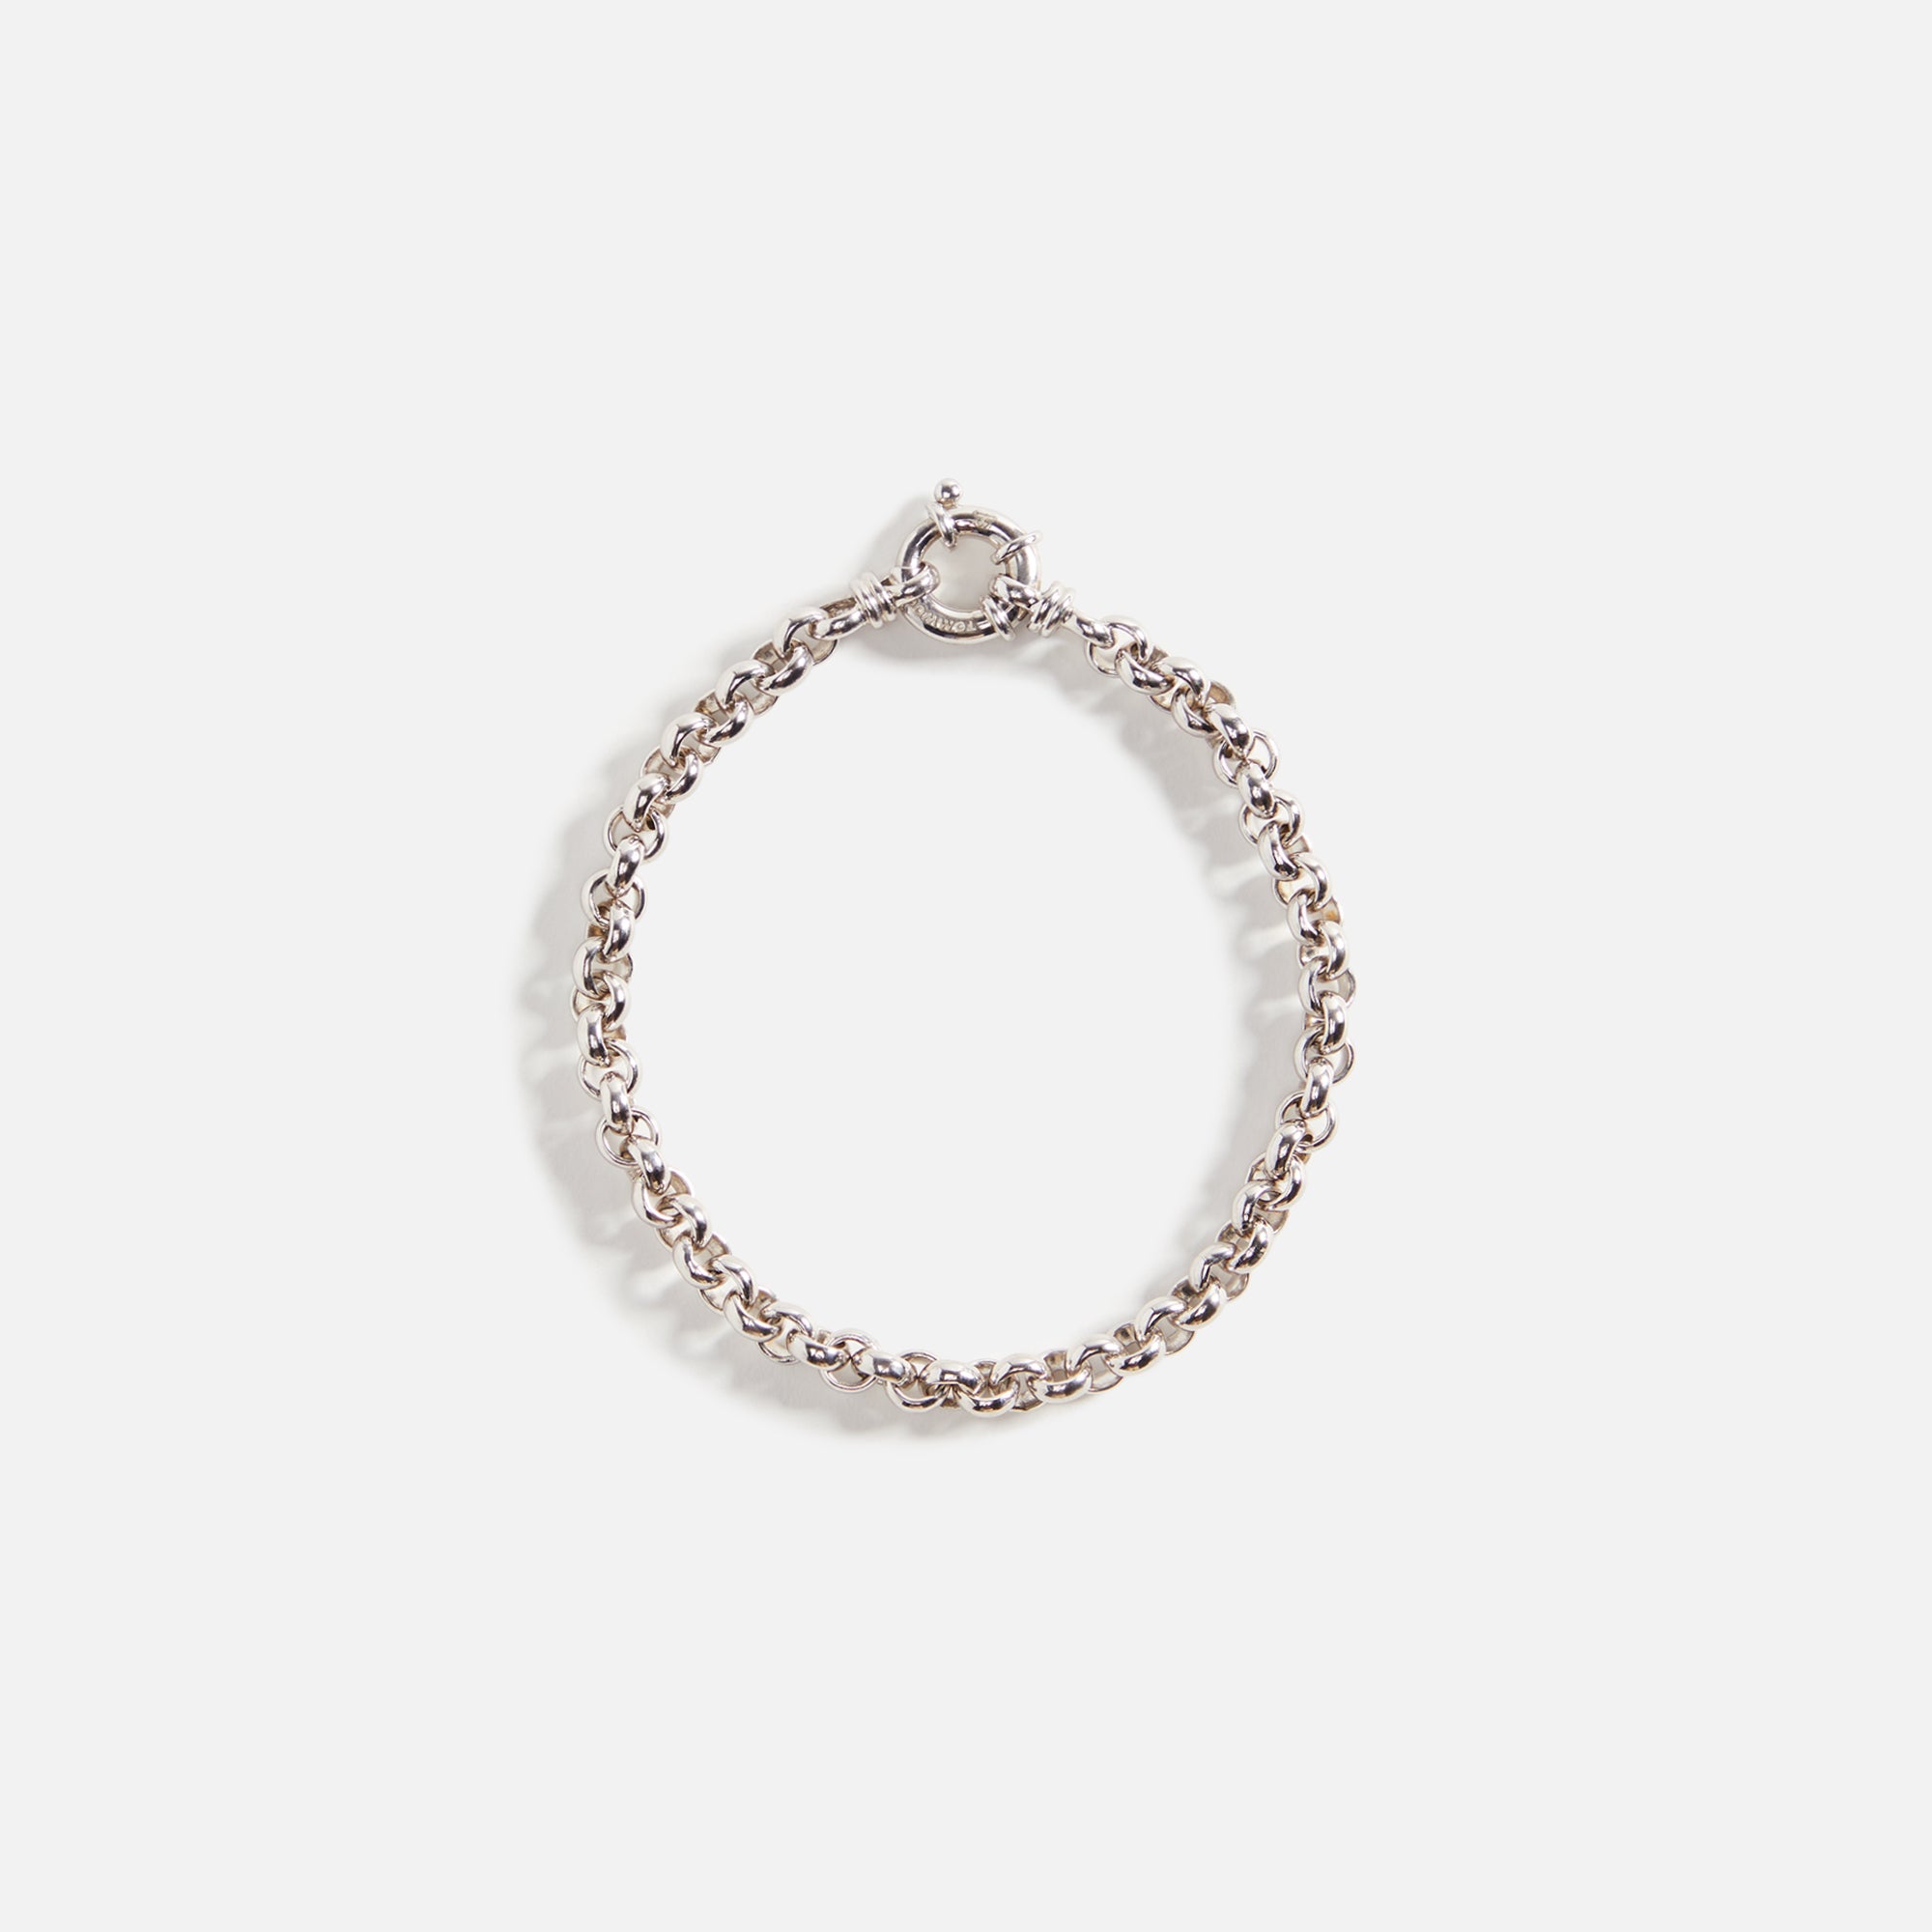 Silver Rolo silver chain necklace, Tom Wood